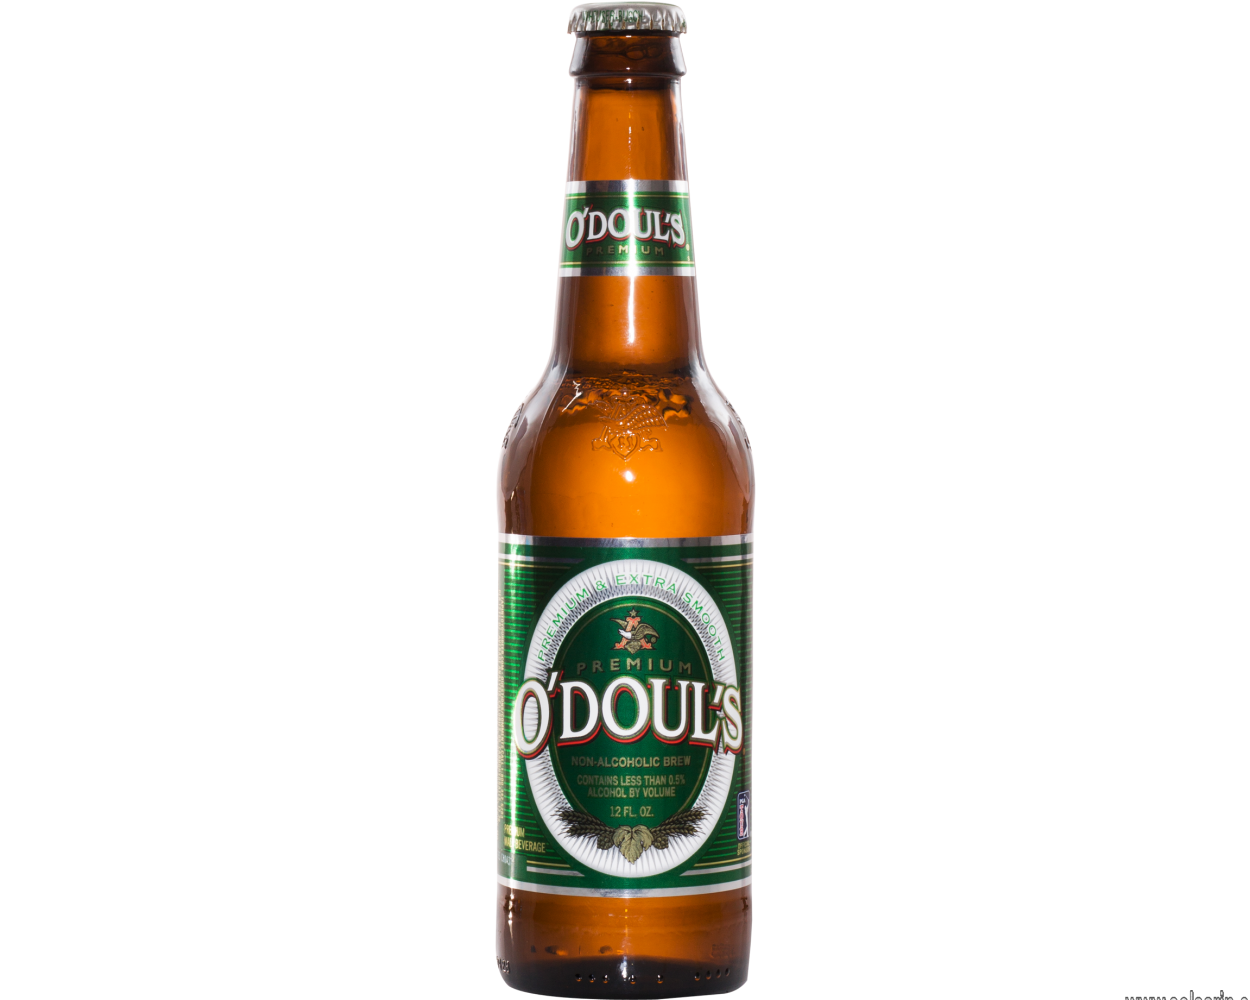 how much alcohol is in o'doul's non-alcoholic beer